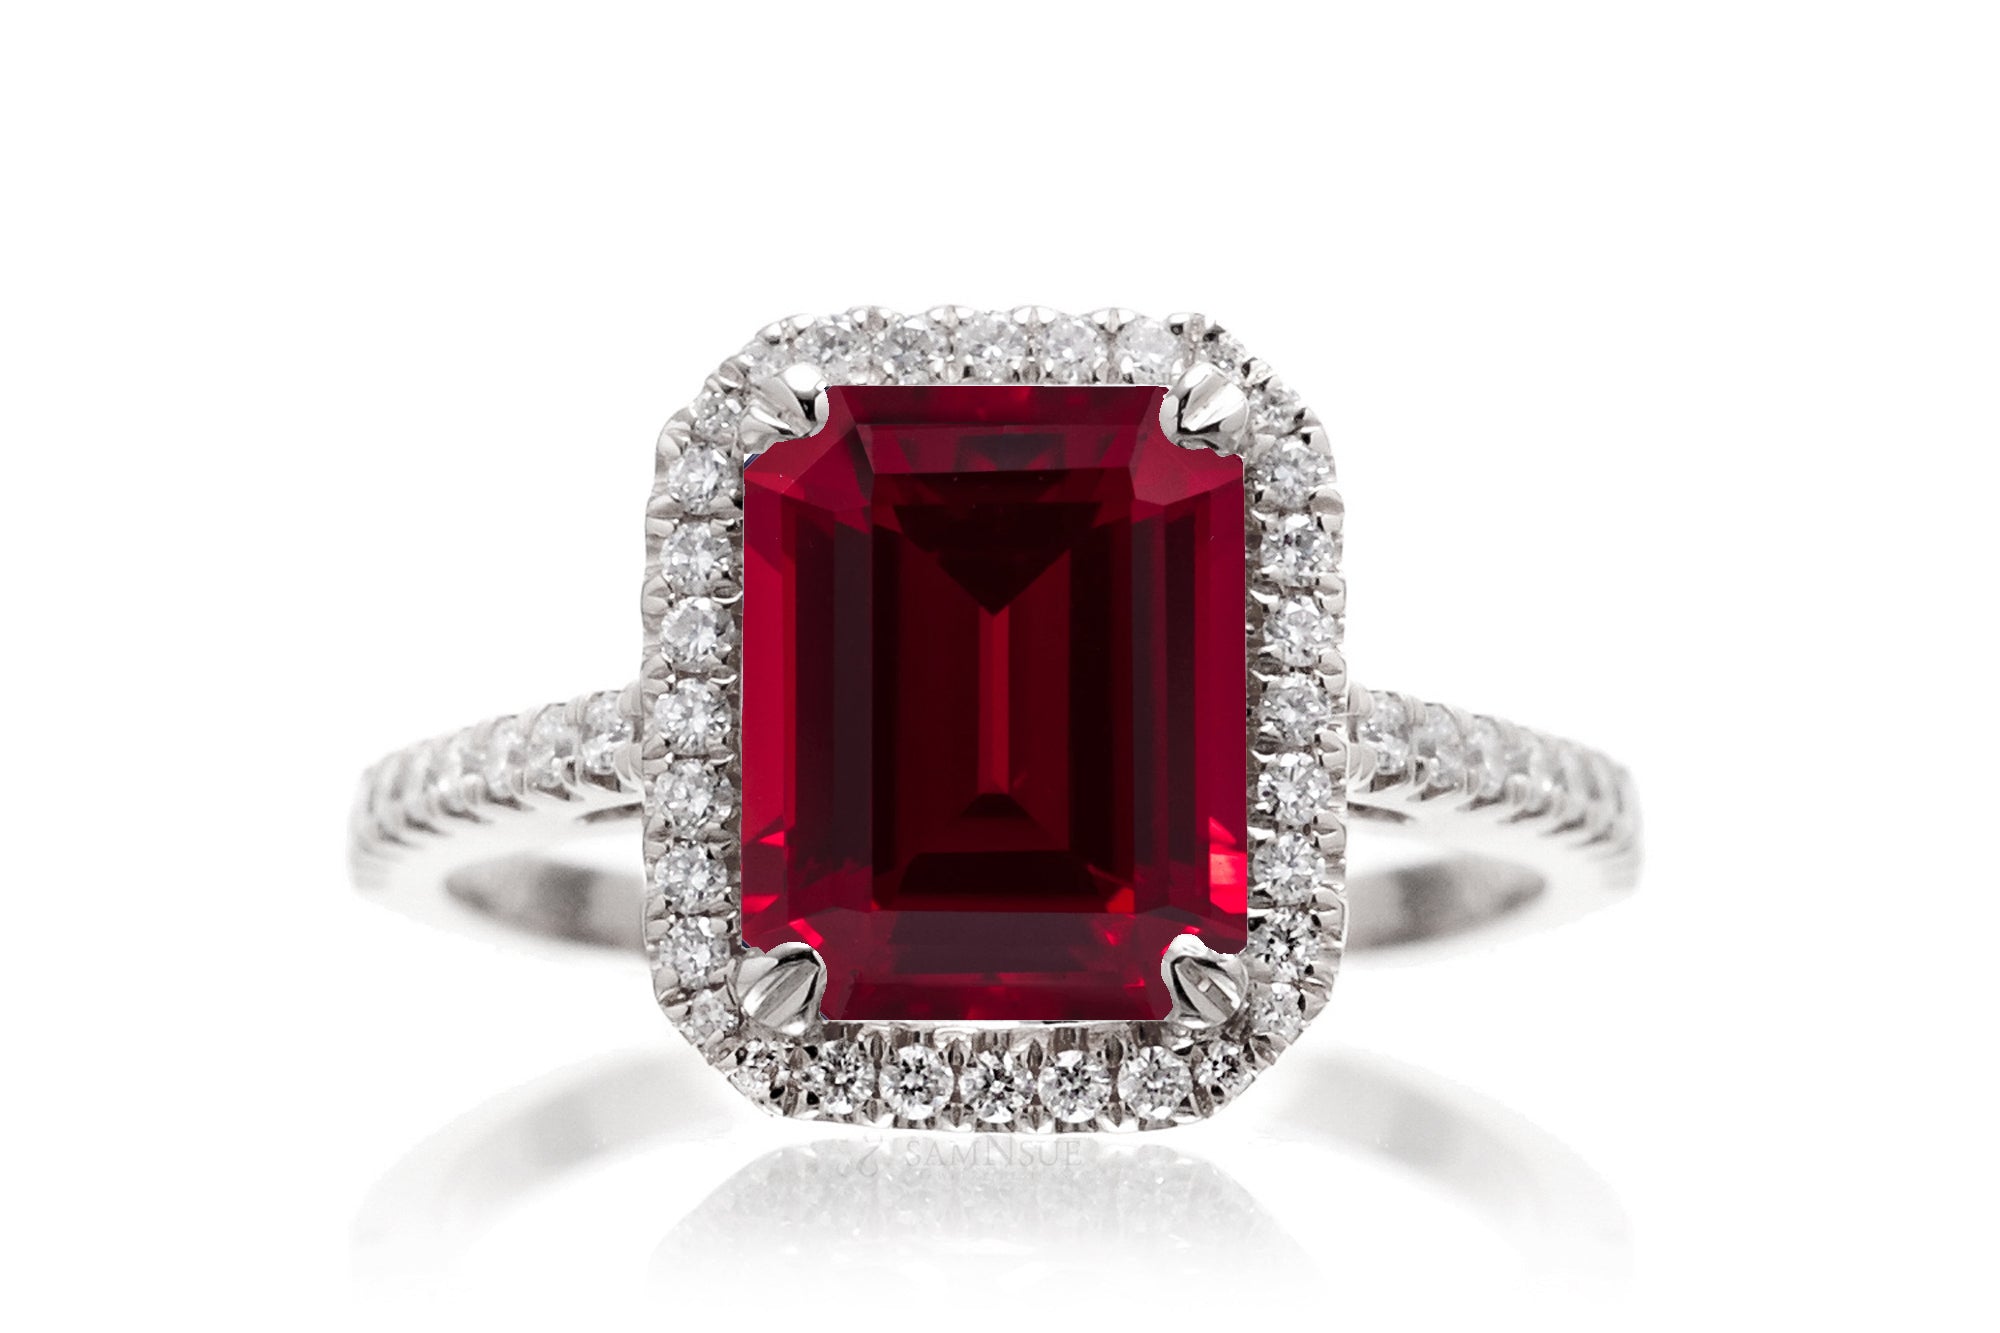 The Signature Emerald Cut Ruby (Lab Grown)